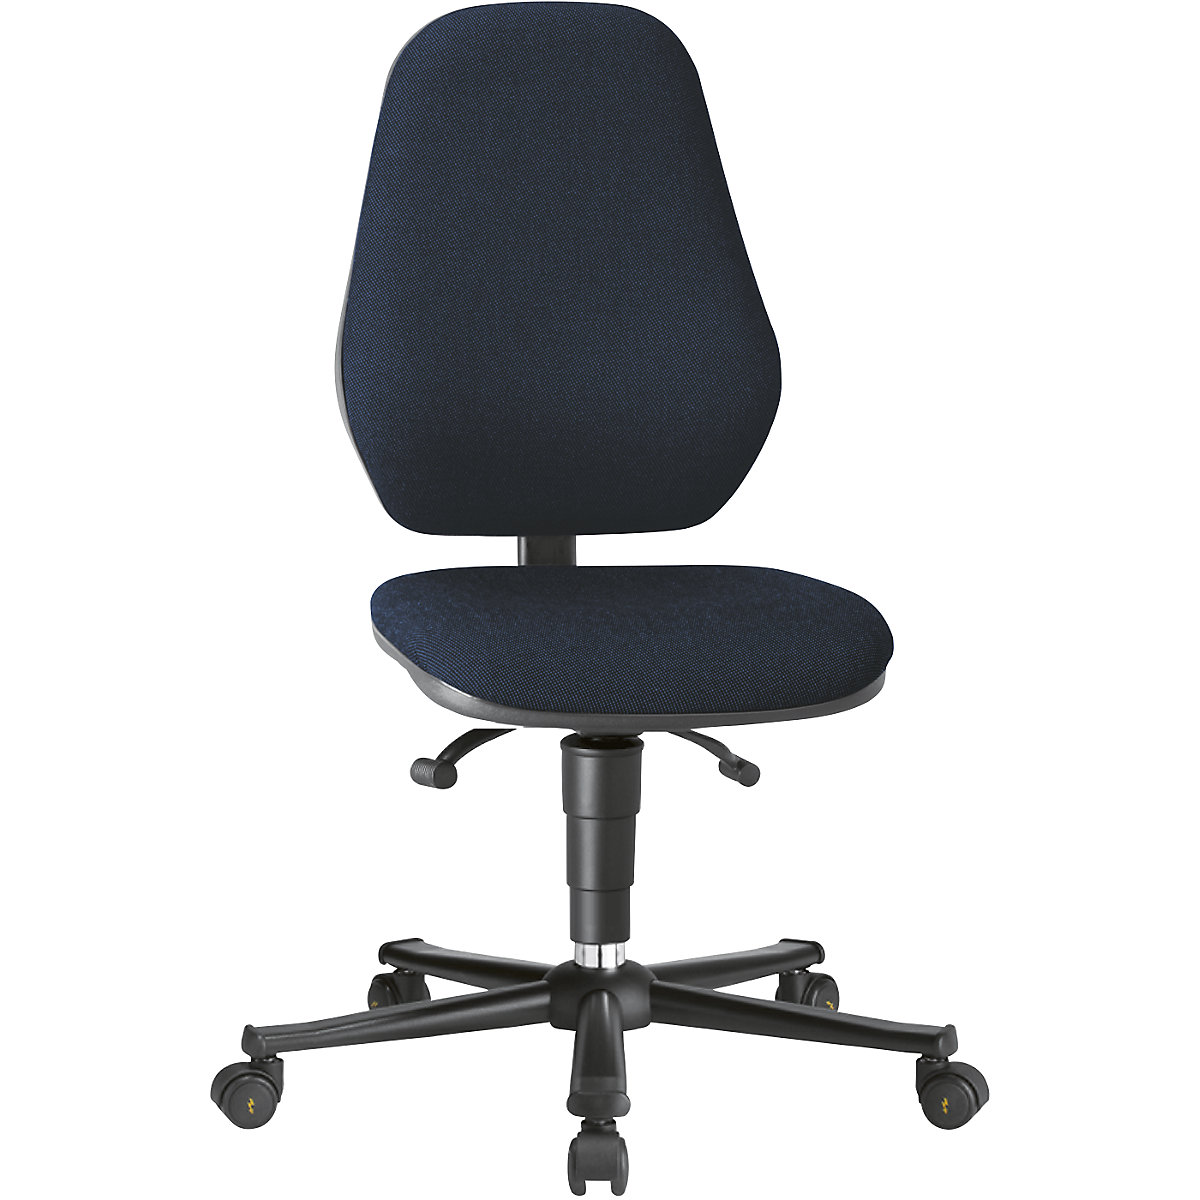 Industrial swivel chair – bimos, with ESD protection, with synchronous mechanism and weight adjustment, with castors, blue fabric covering-9